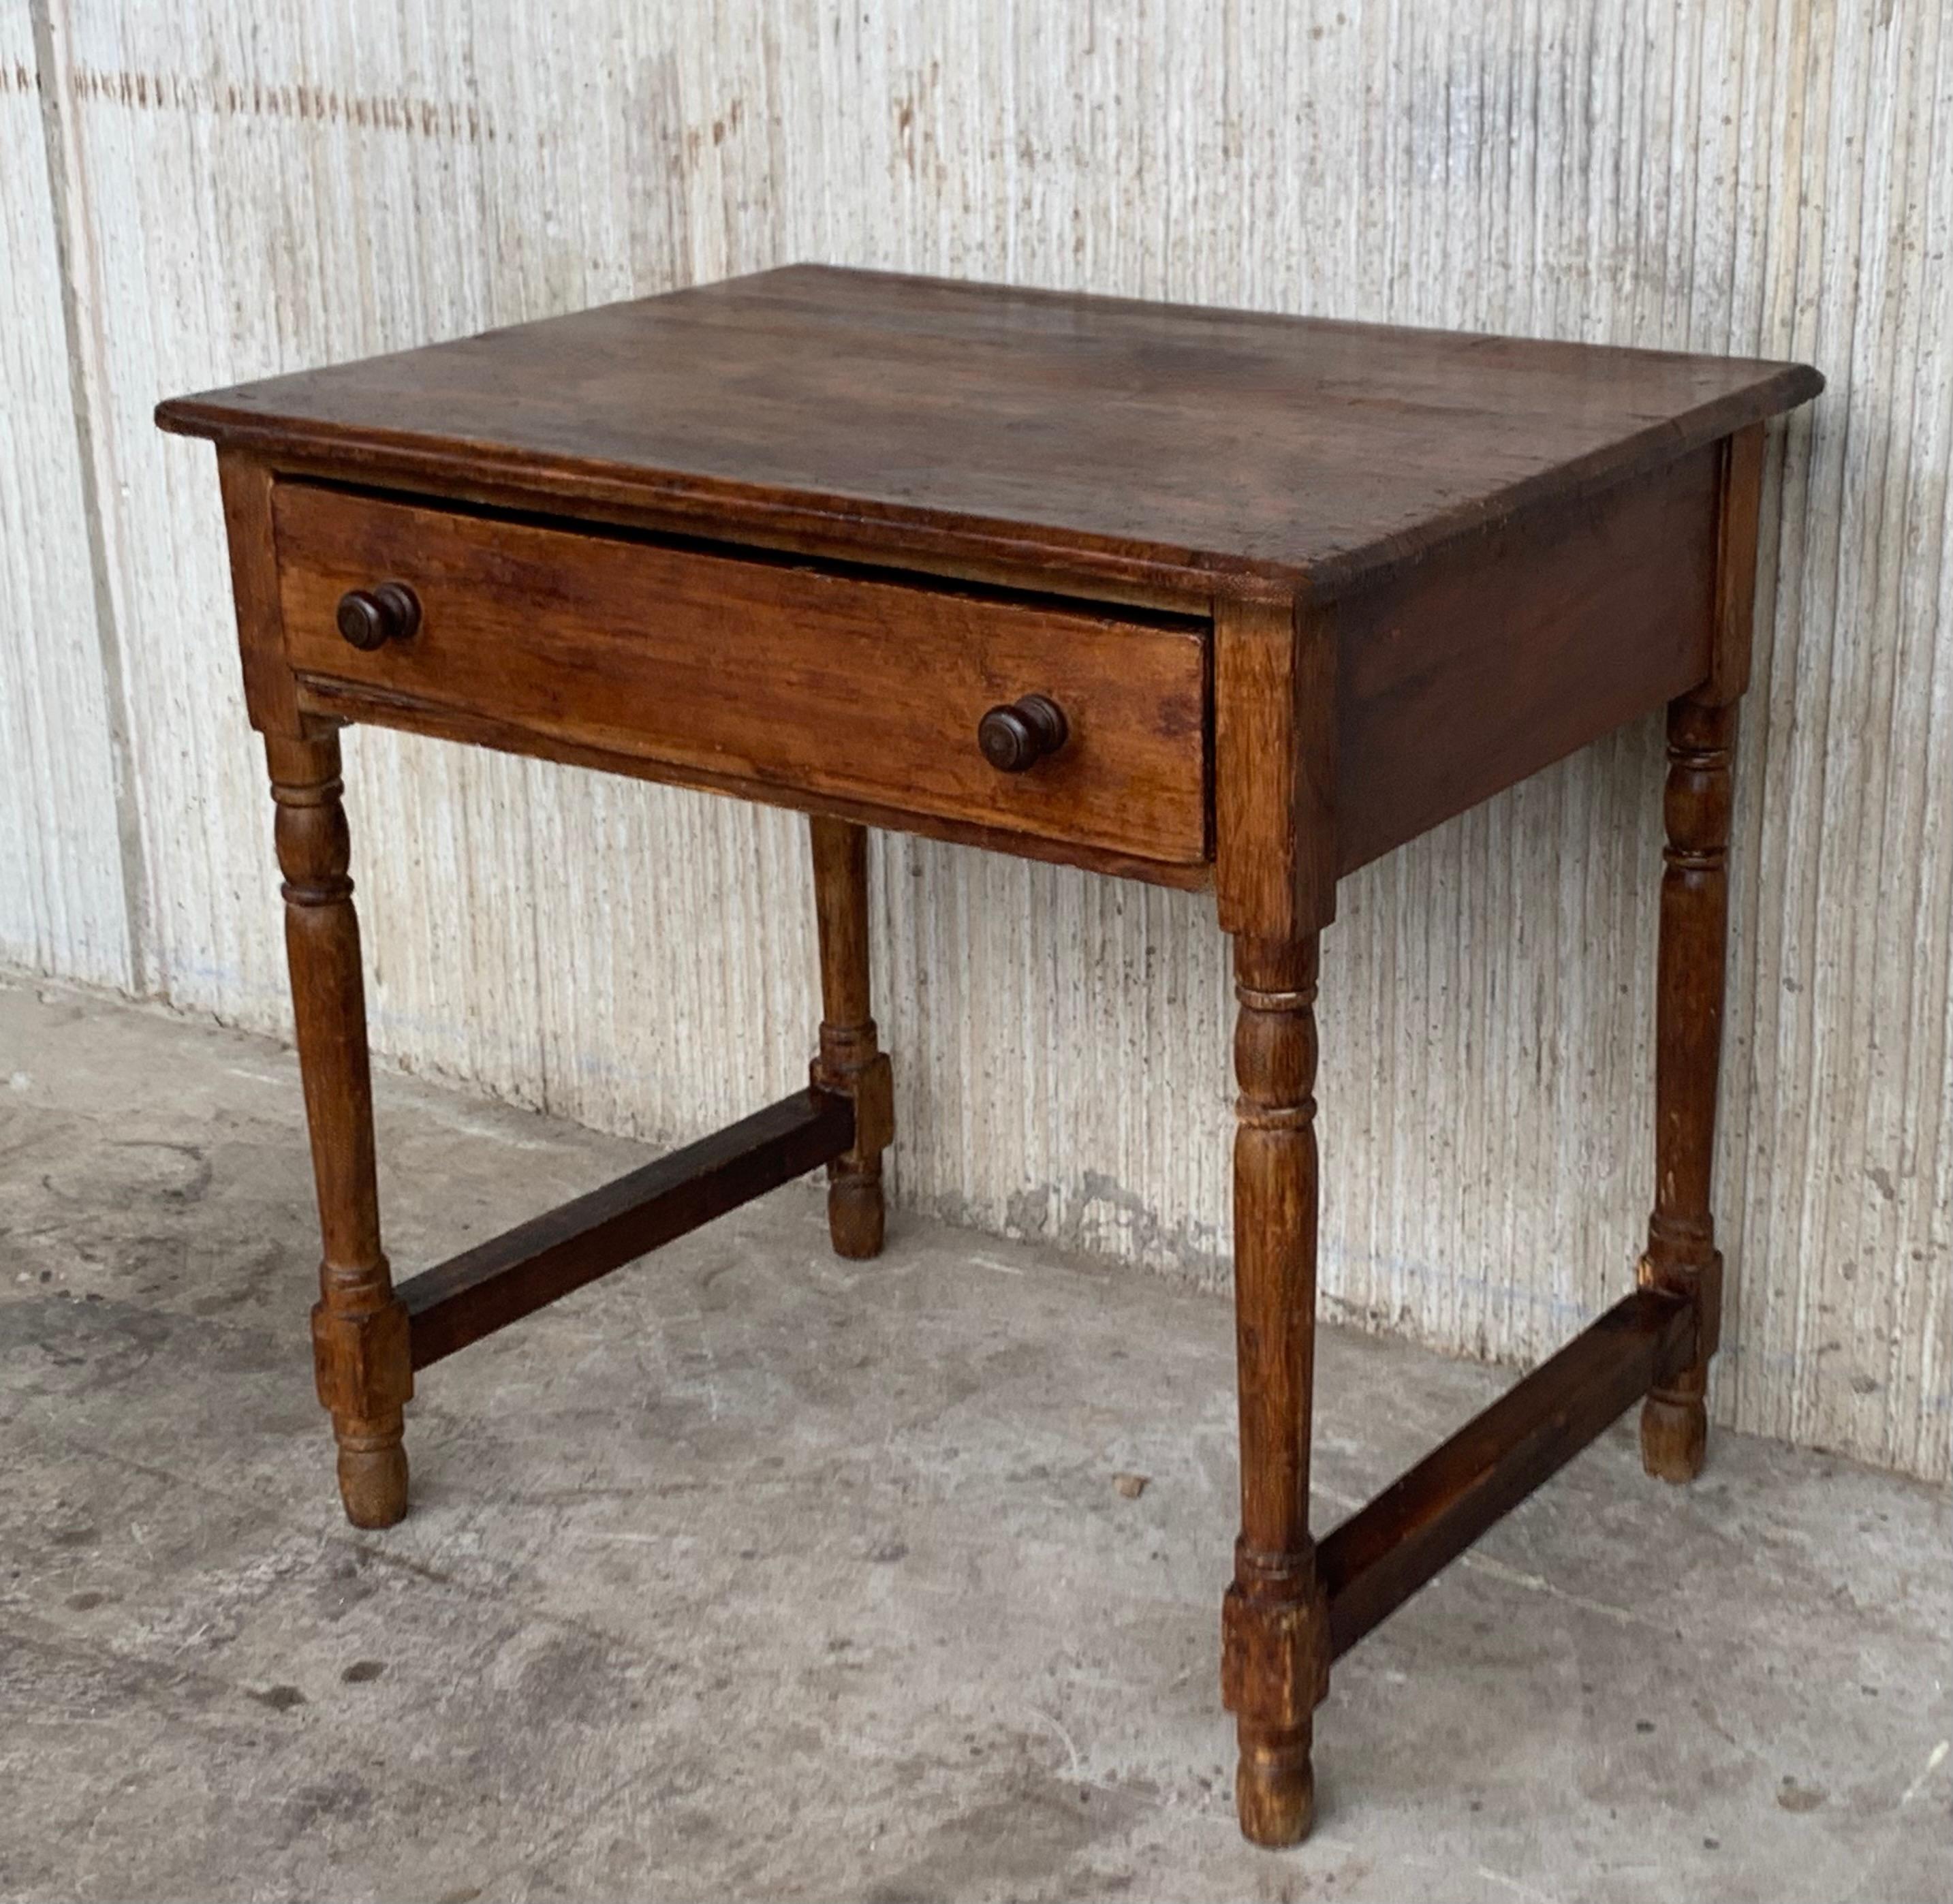 French Provincial Country French Style Pine Farmhouse Side, Coffee or Nightstand Table with Drawer